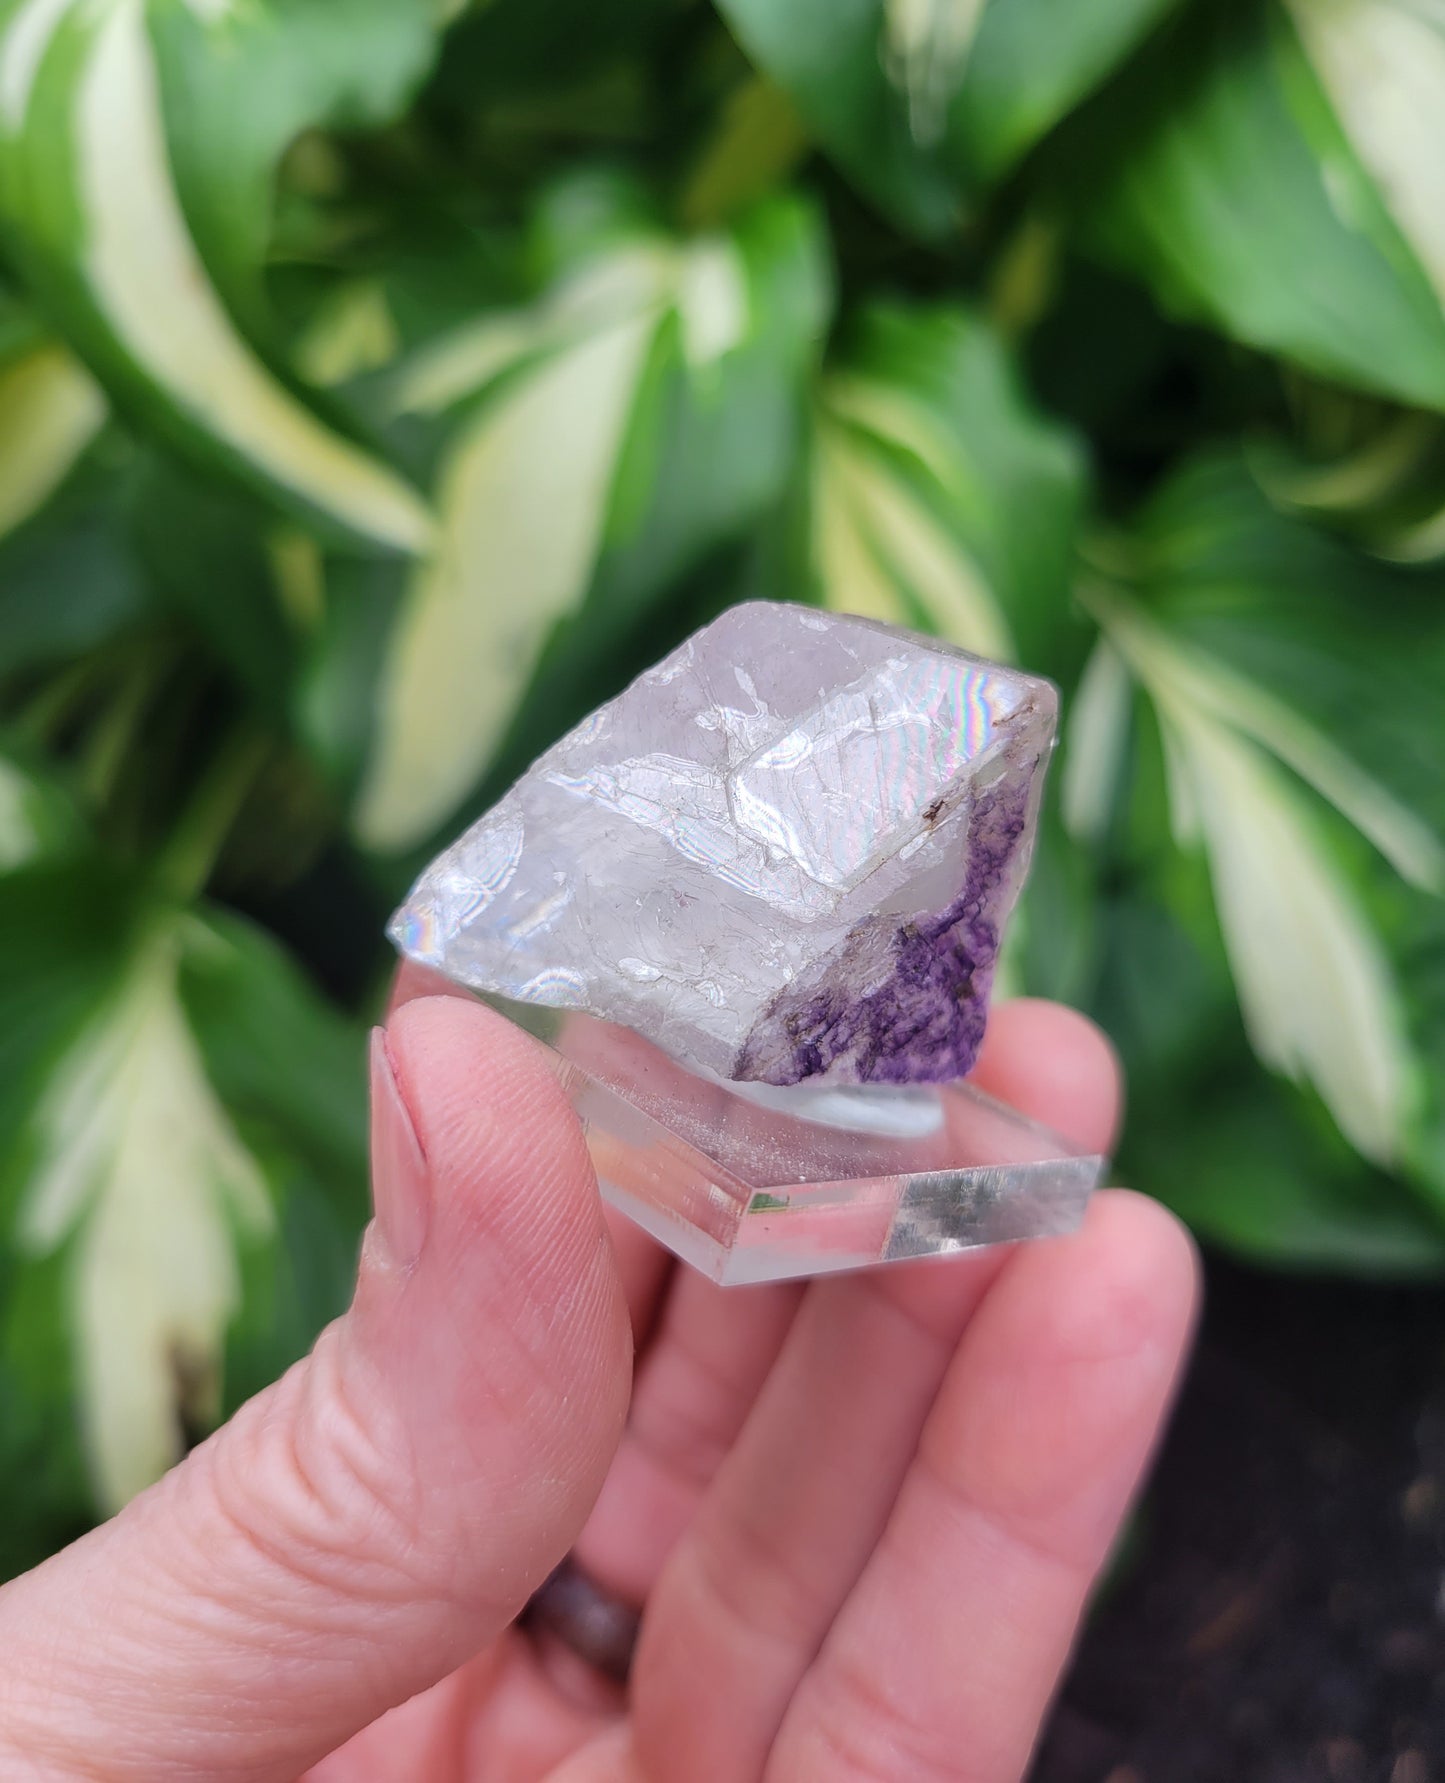 Fluorite from Cave in Rock, Illinois